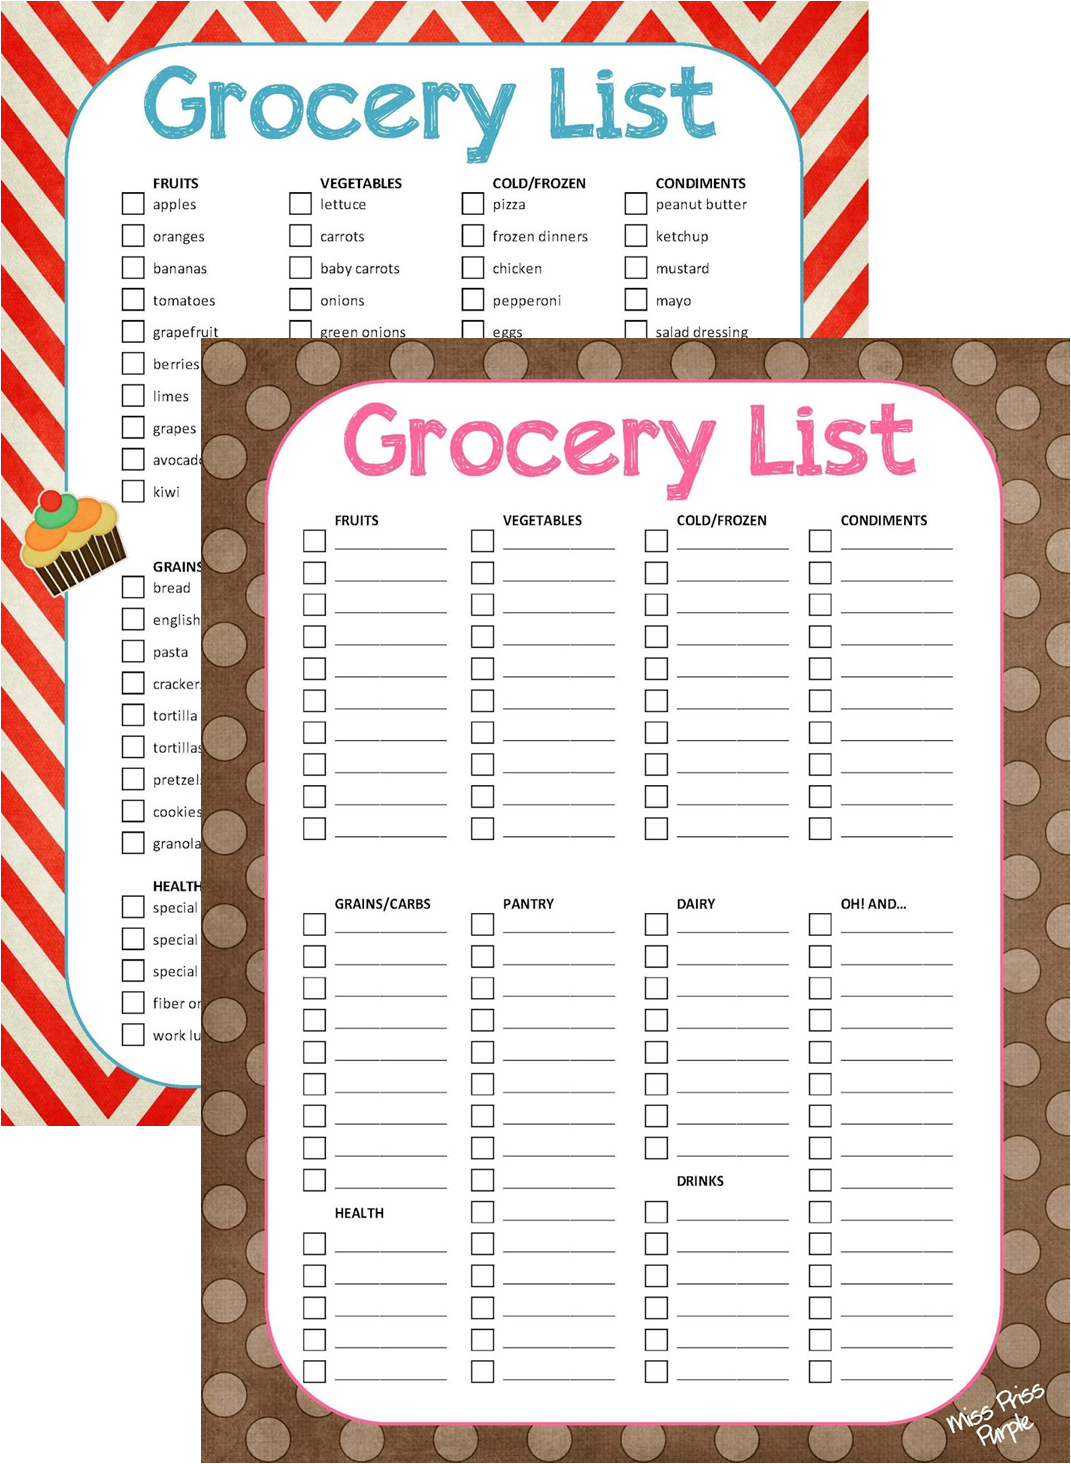 Grocery list. Grocery shopping list. Groceries лист. Shopping list Party. My mum shopping list